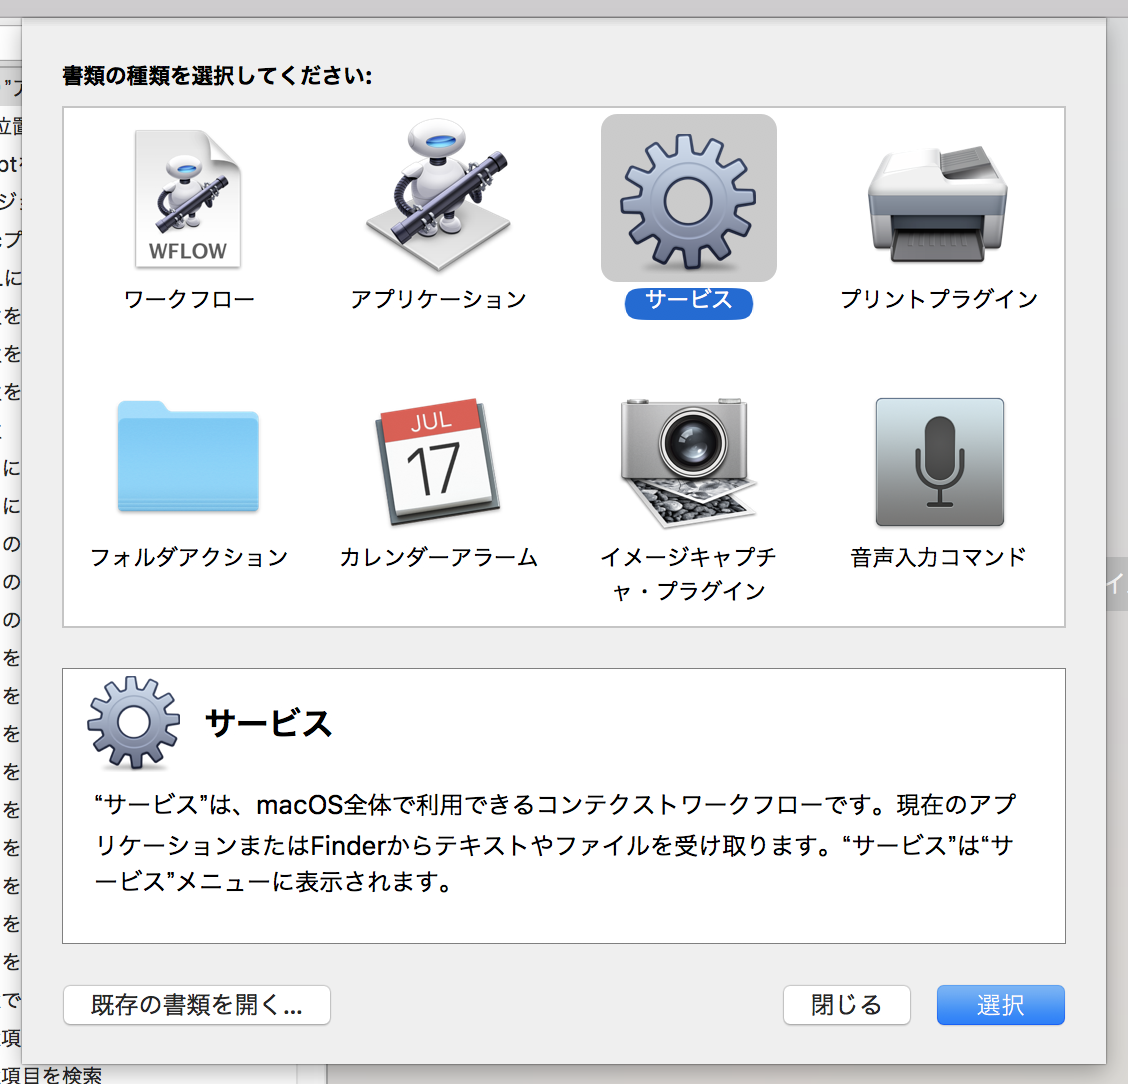 automator_new_service.png